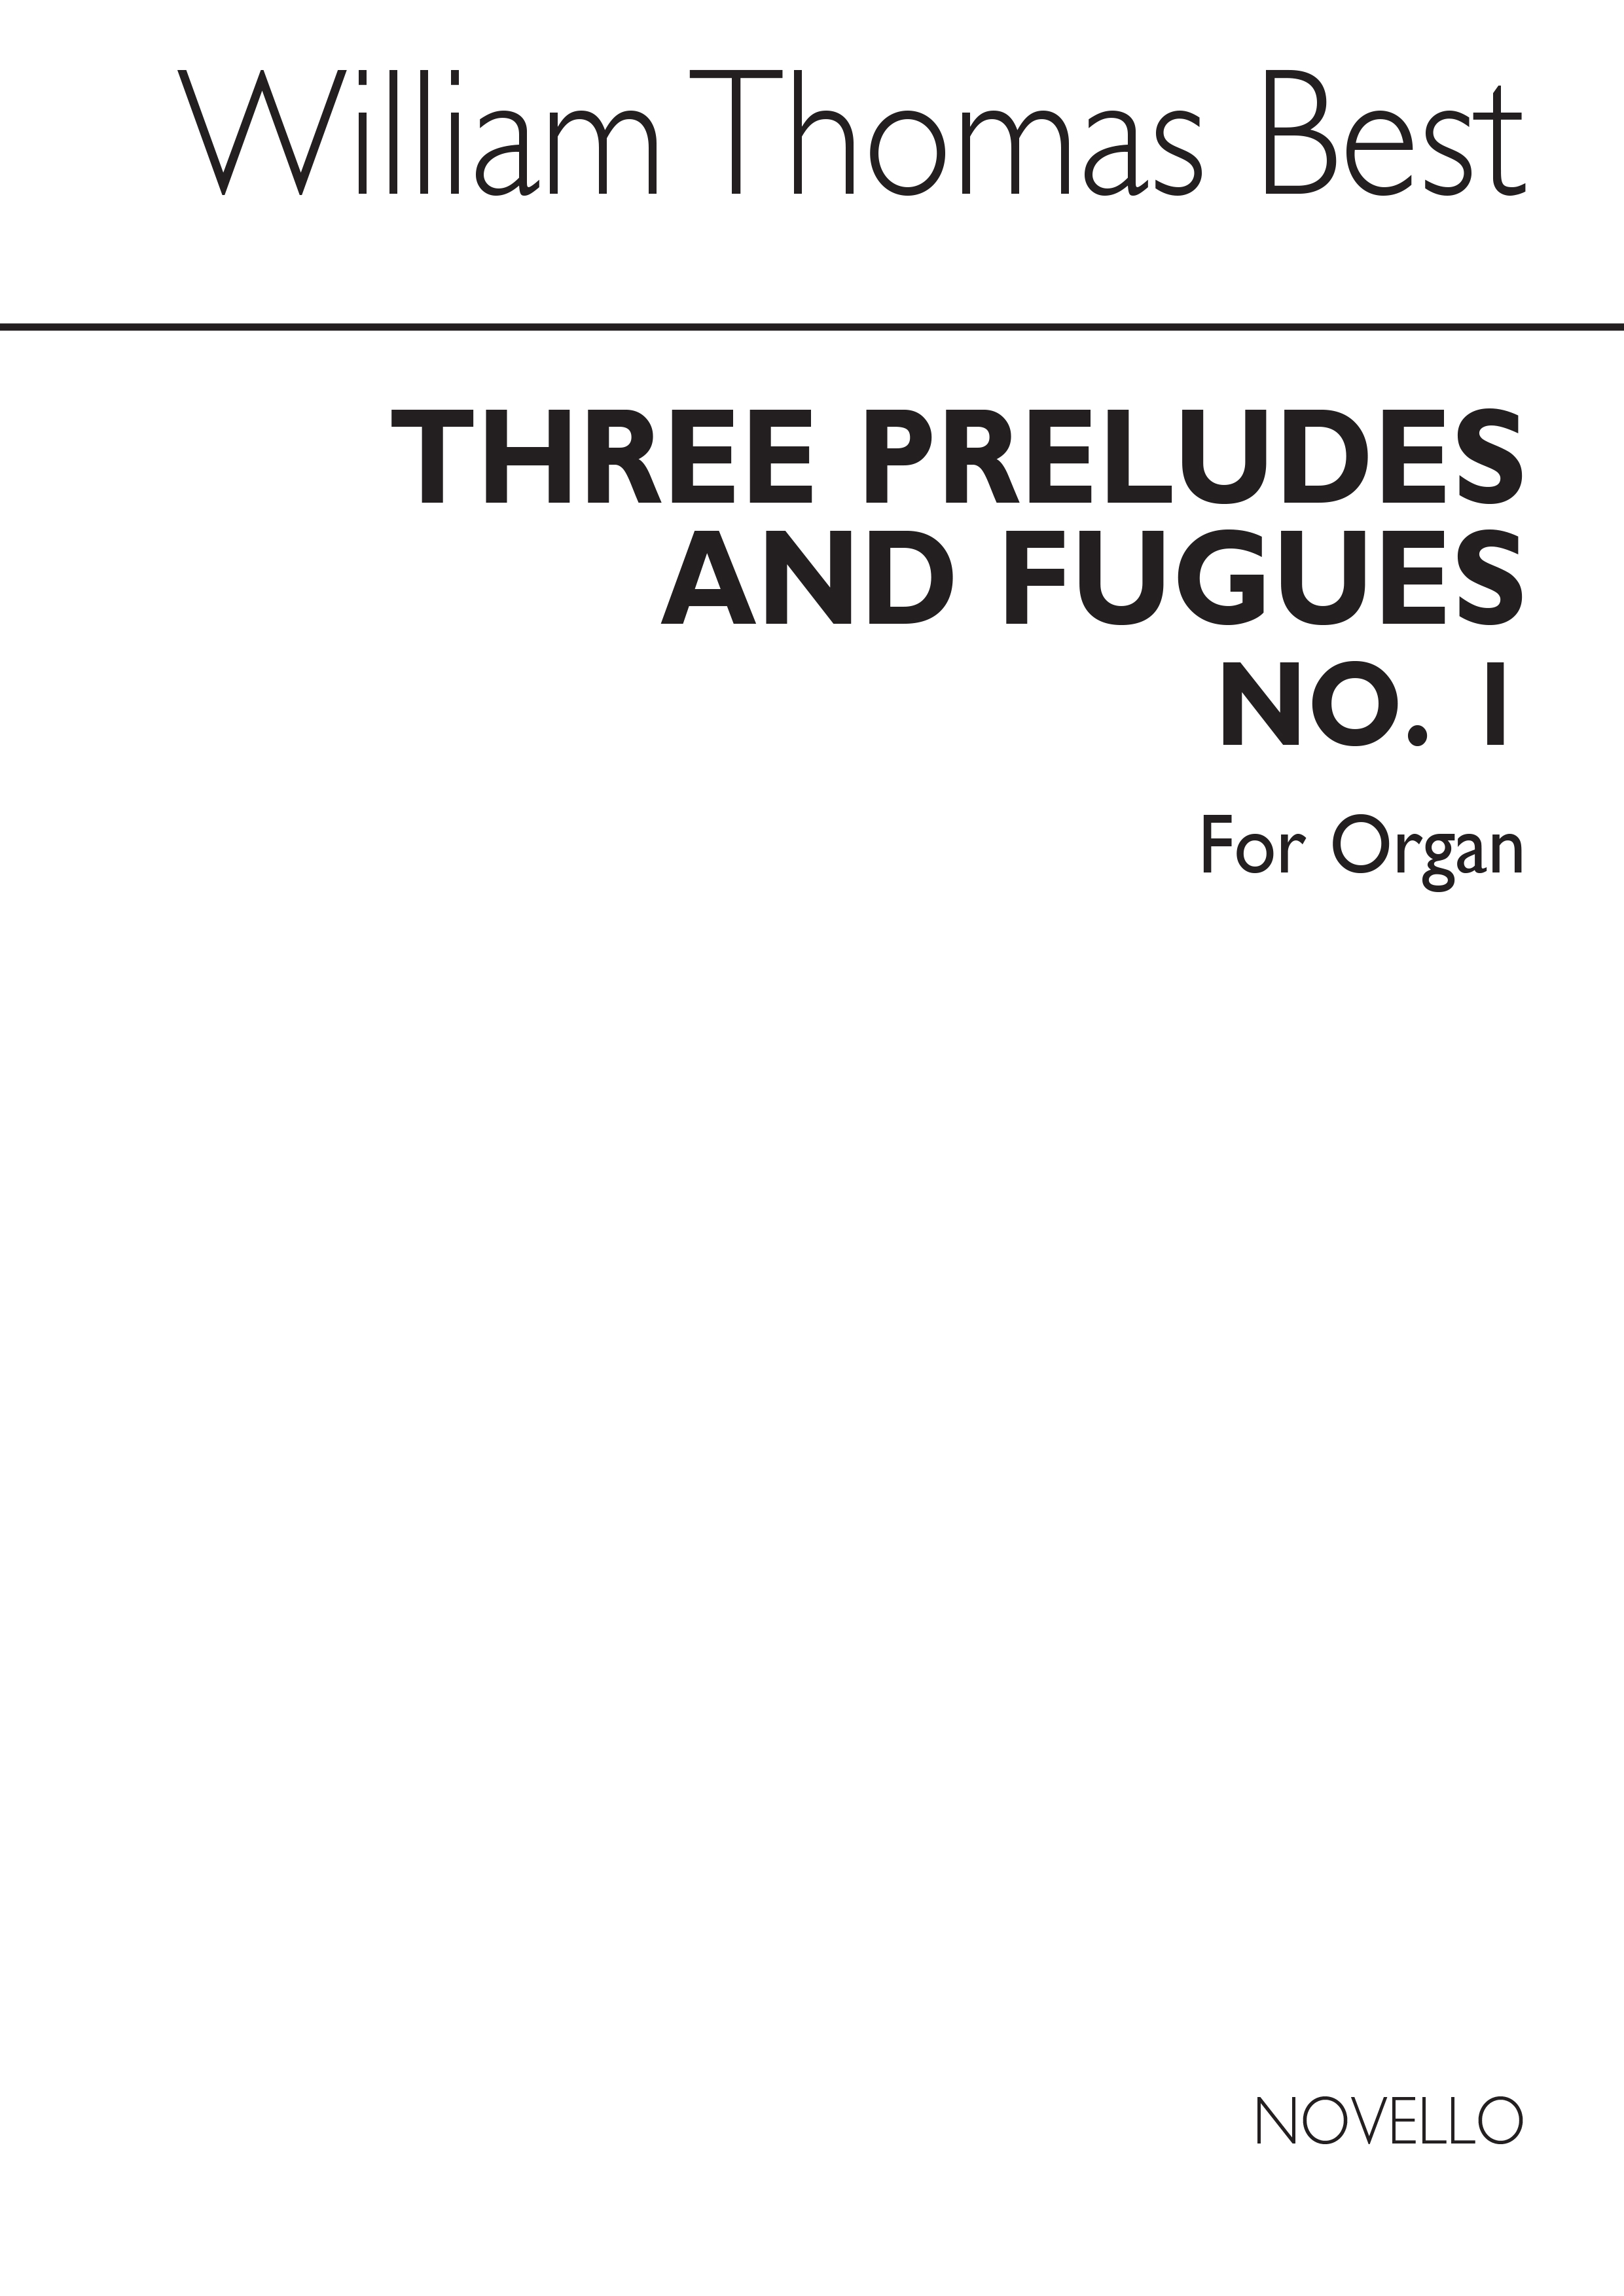 W.T. Best: Prelude And Fugues No.1 In A Minor